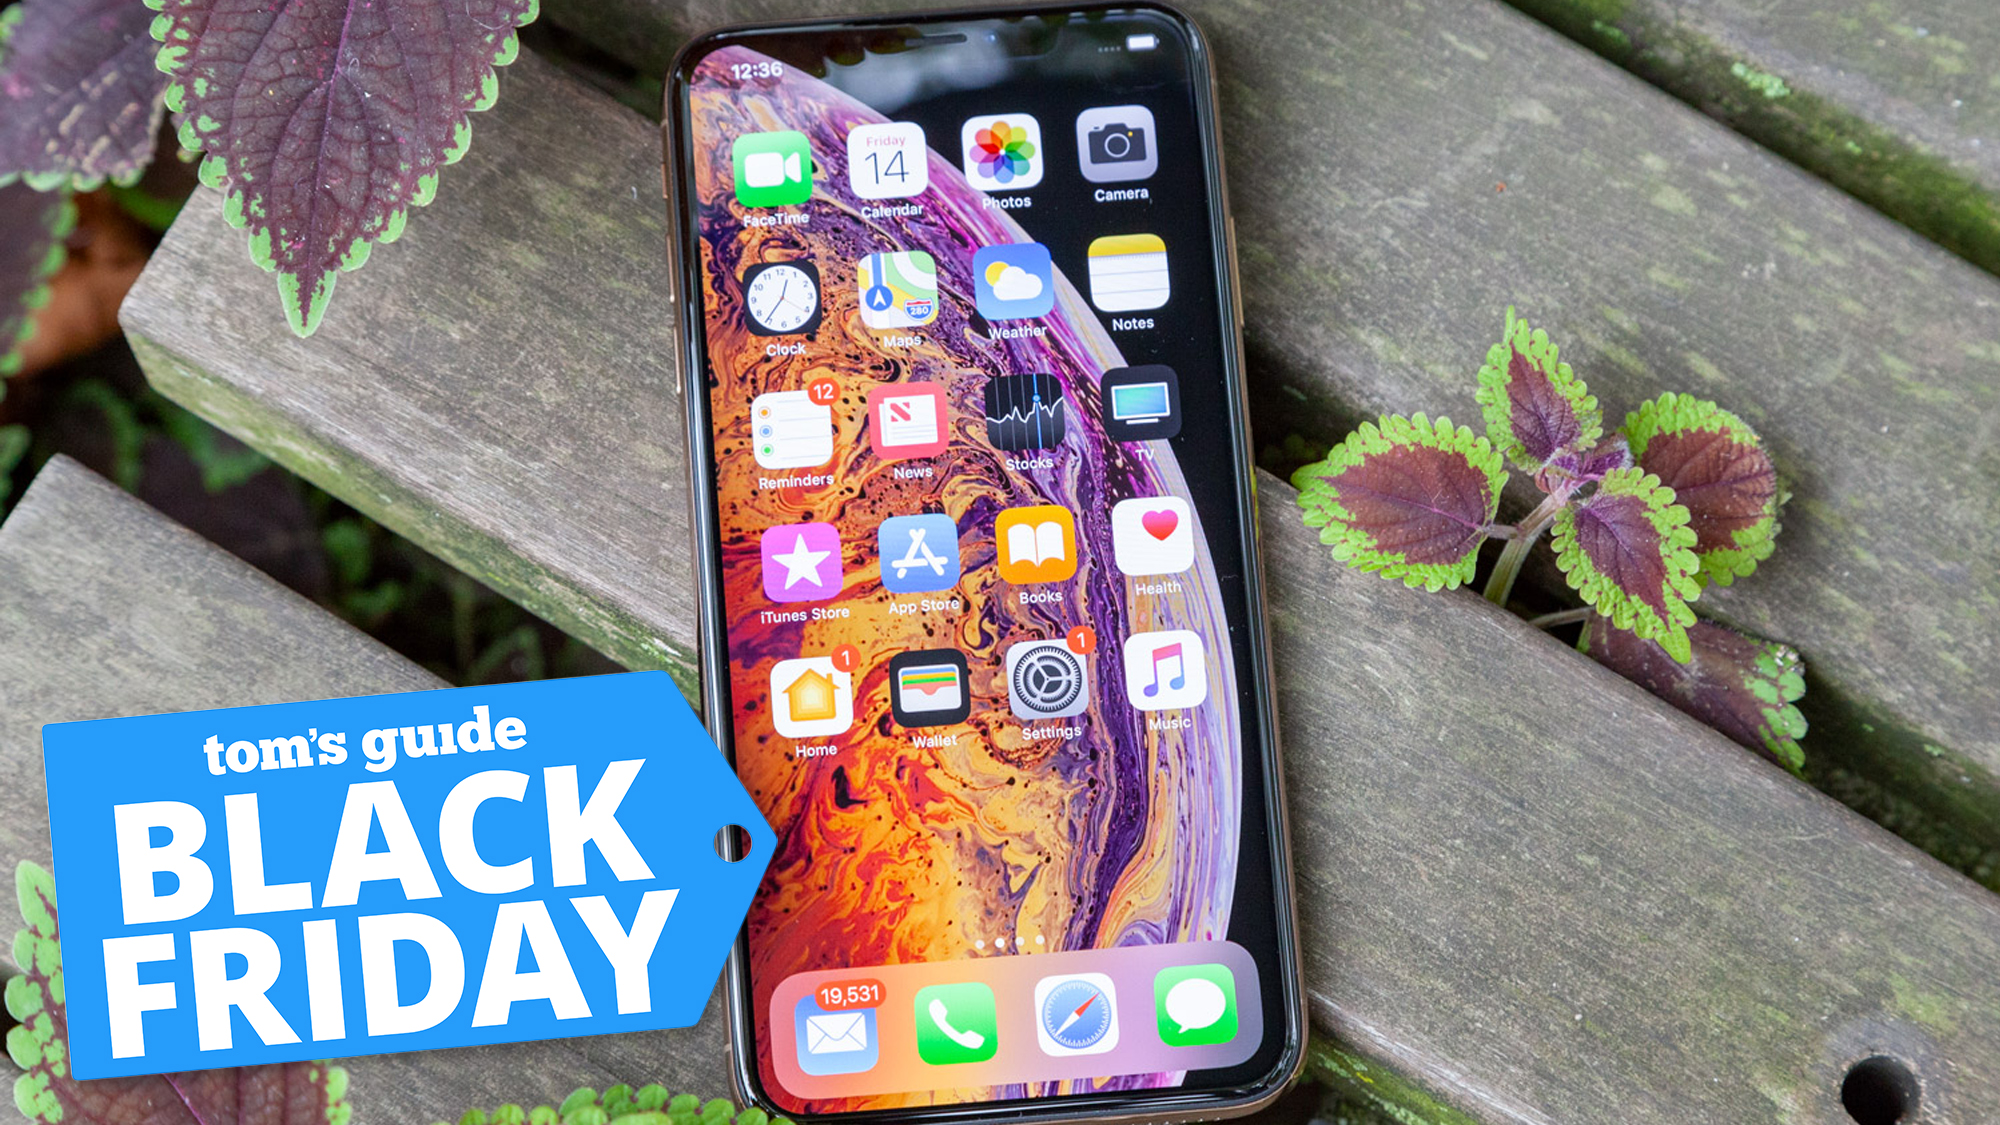 This Black Friday iPhone deal gets you an iPhone XS for just 30 Tom